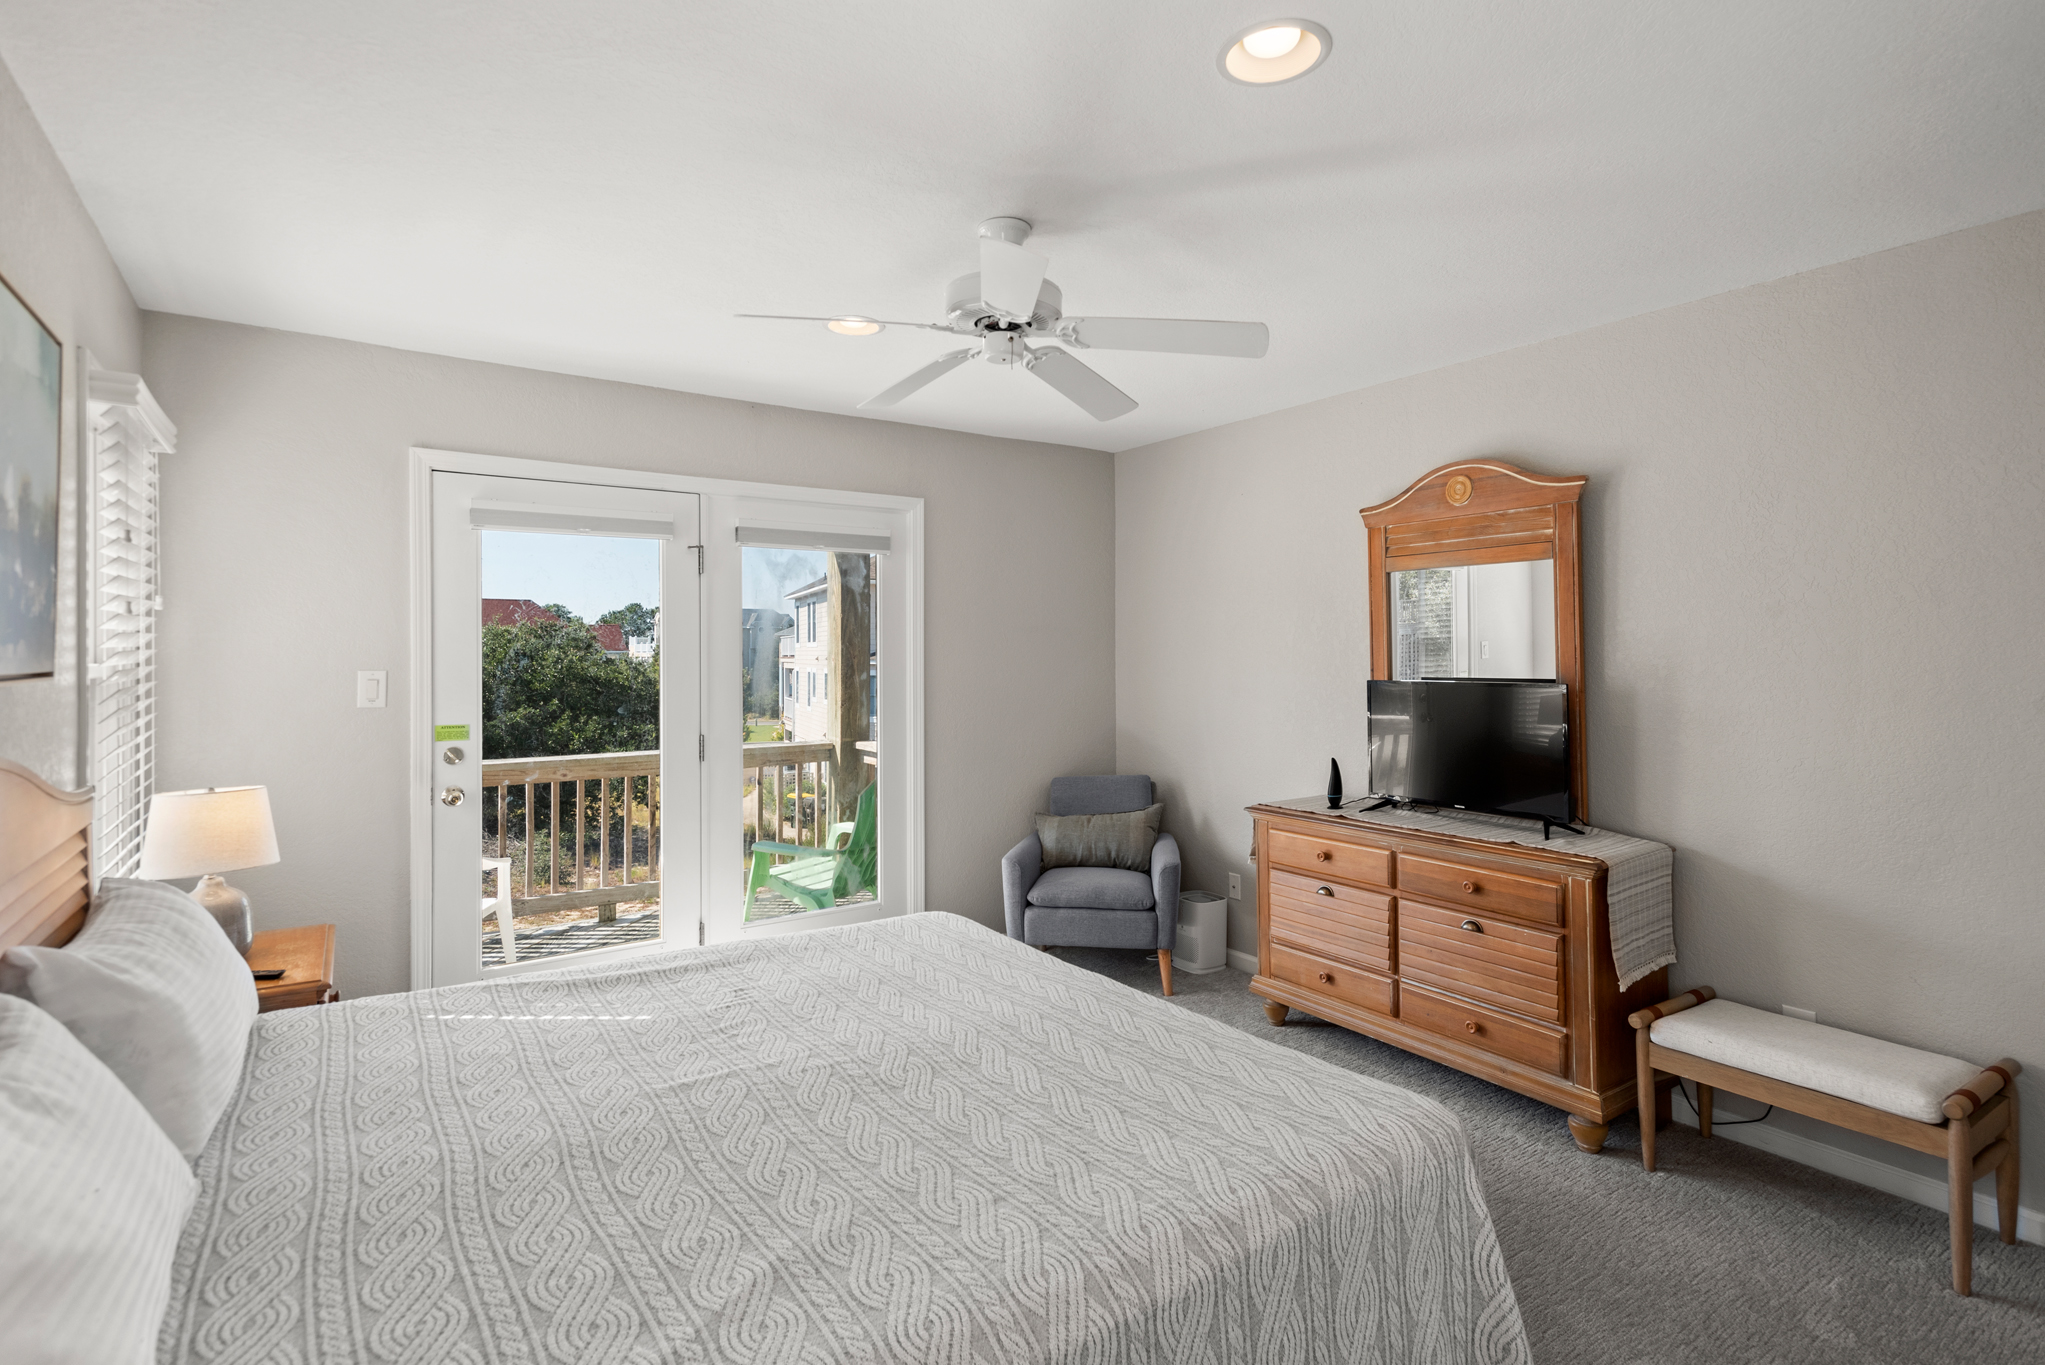 M841: Lighthouse Point | Mid Level Bedroom 4